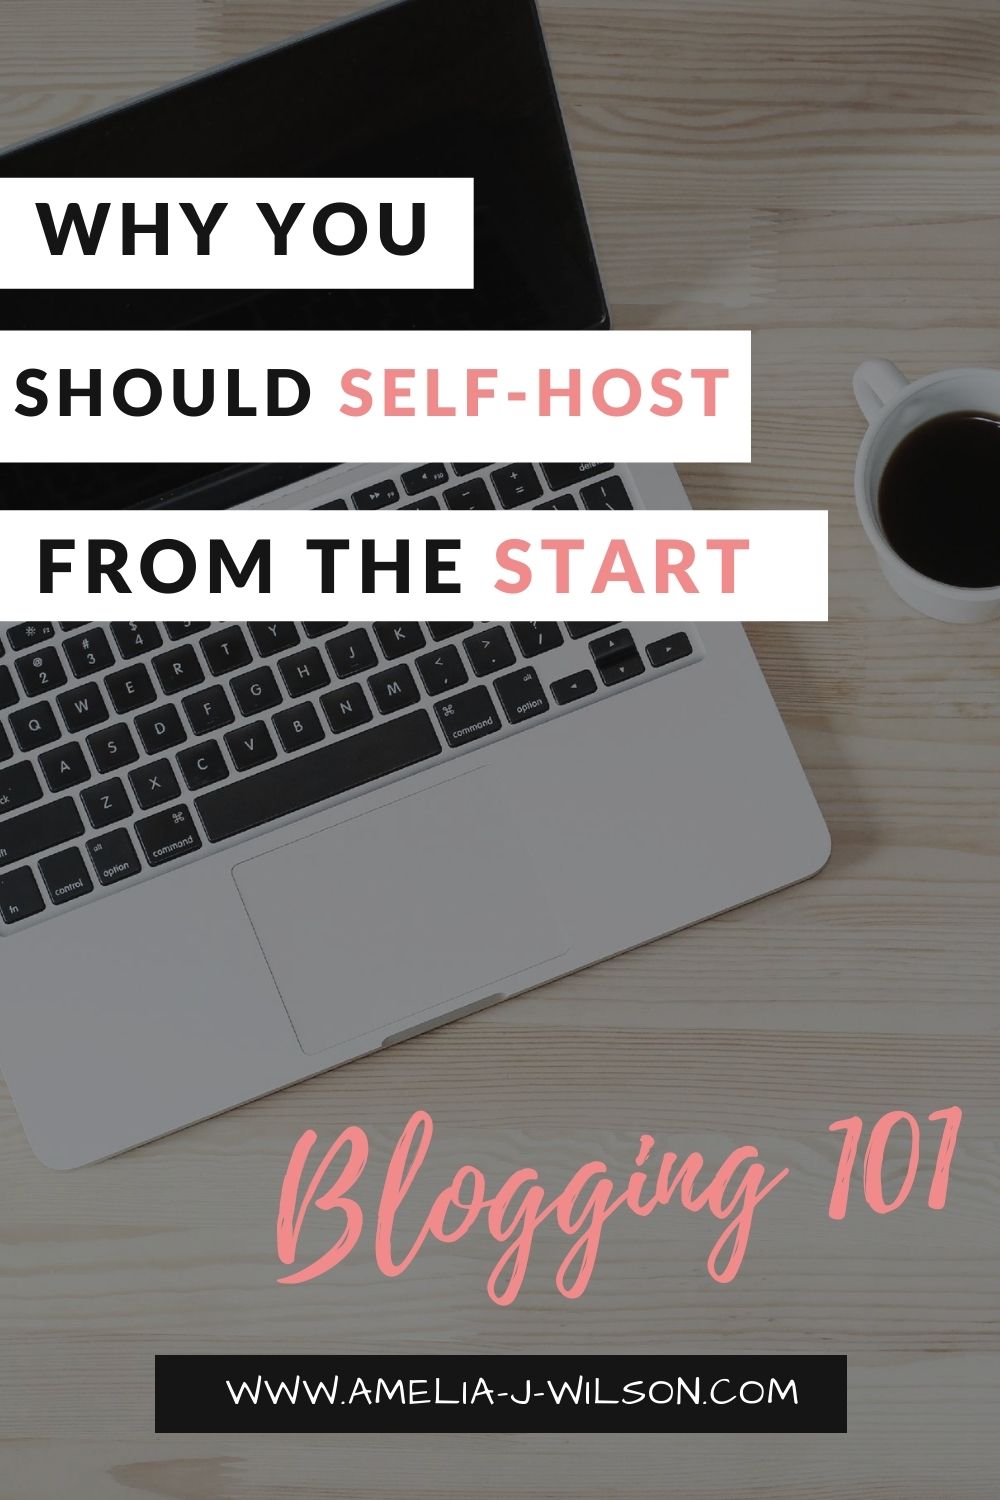 Why you should self-host from the start: blogging 101